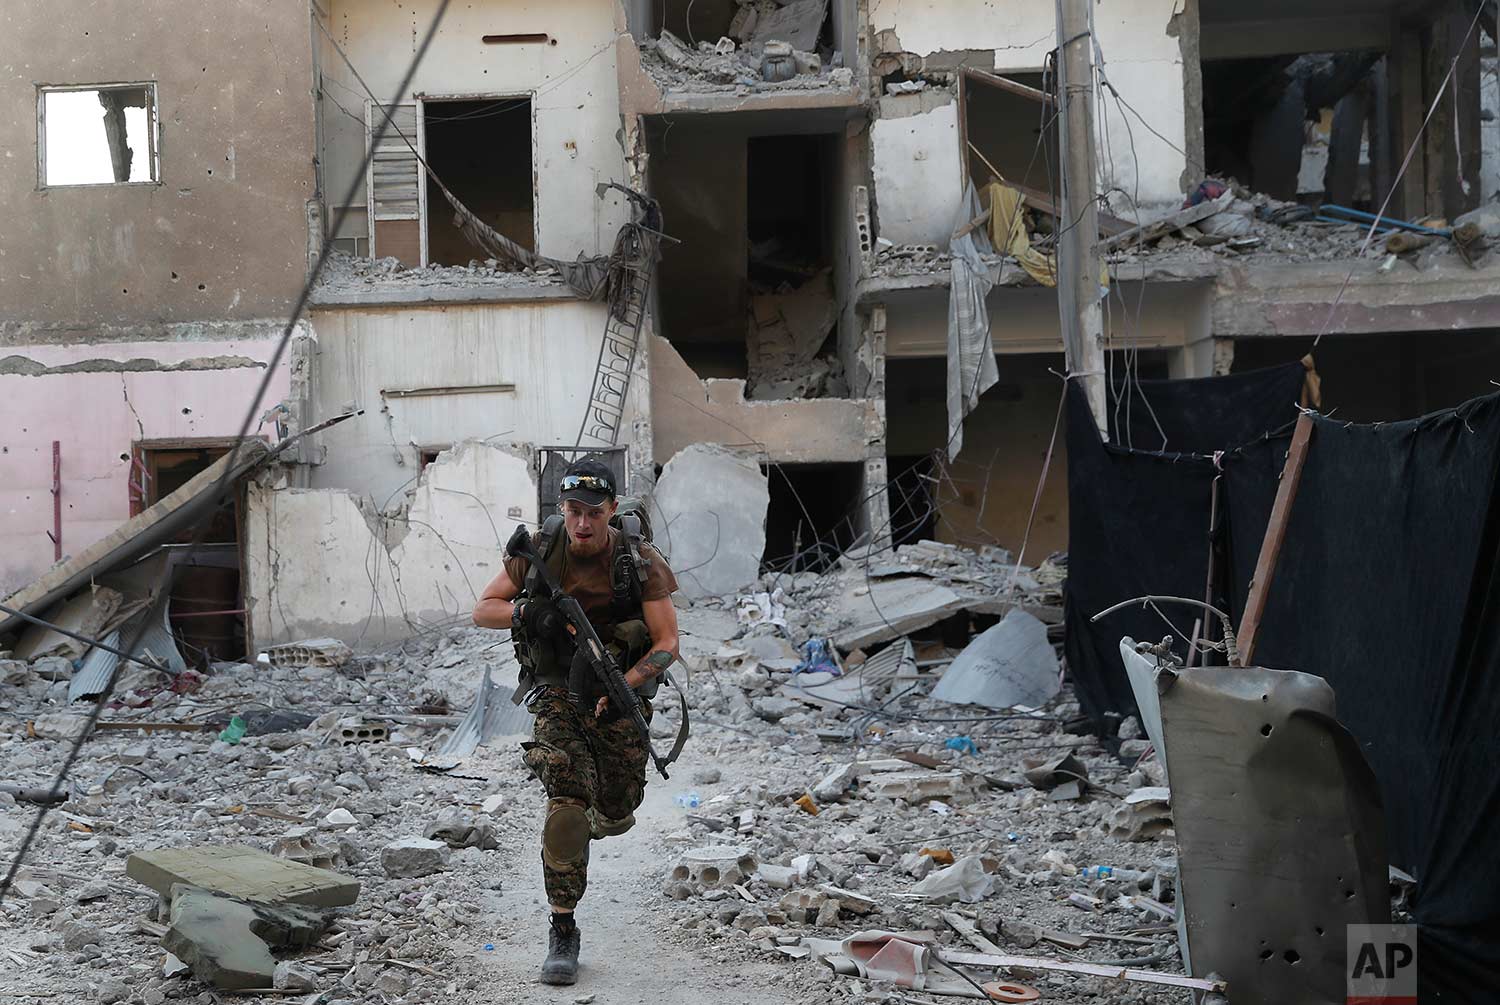 A U.S.-backed Syrian Democratic Forces fighter runs in front of a damaged building as he crosses a street on the front line, in Raqqa city, Syria, Thursday, July 27, 2017. (AP Photo/Hussein Malla)